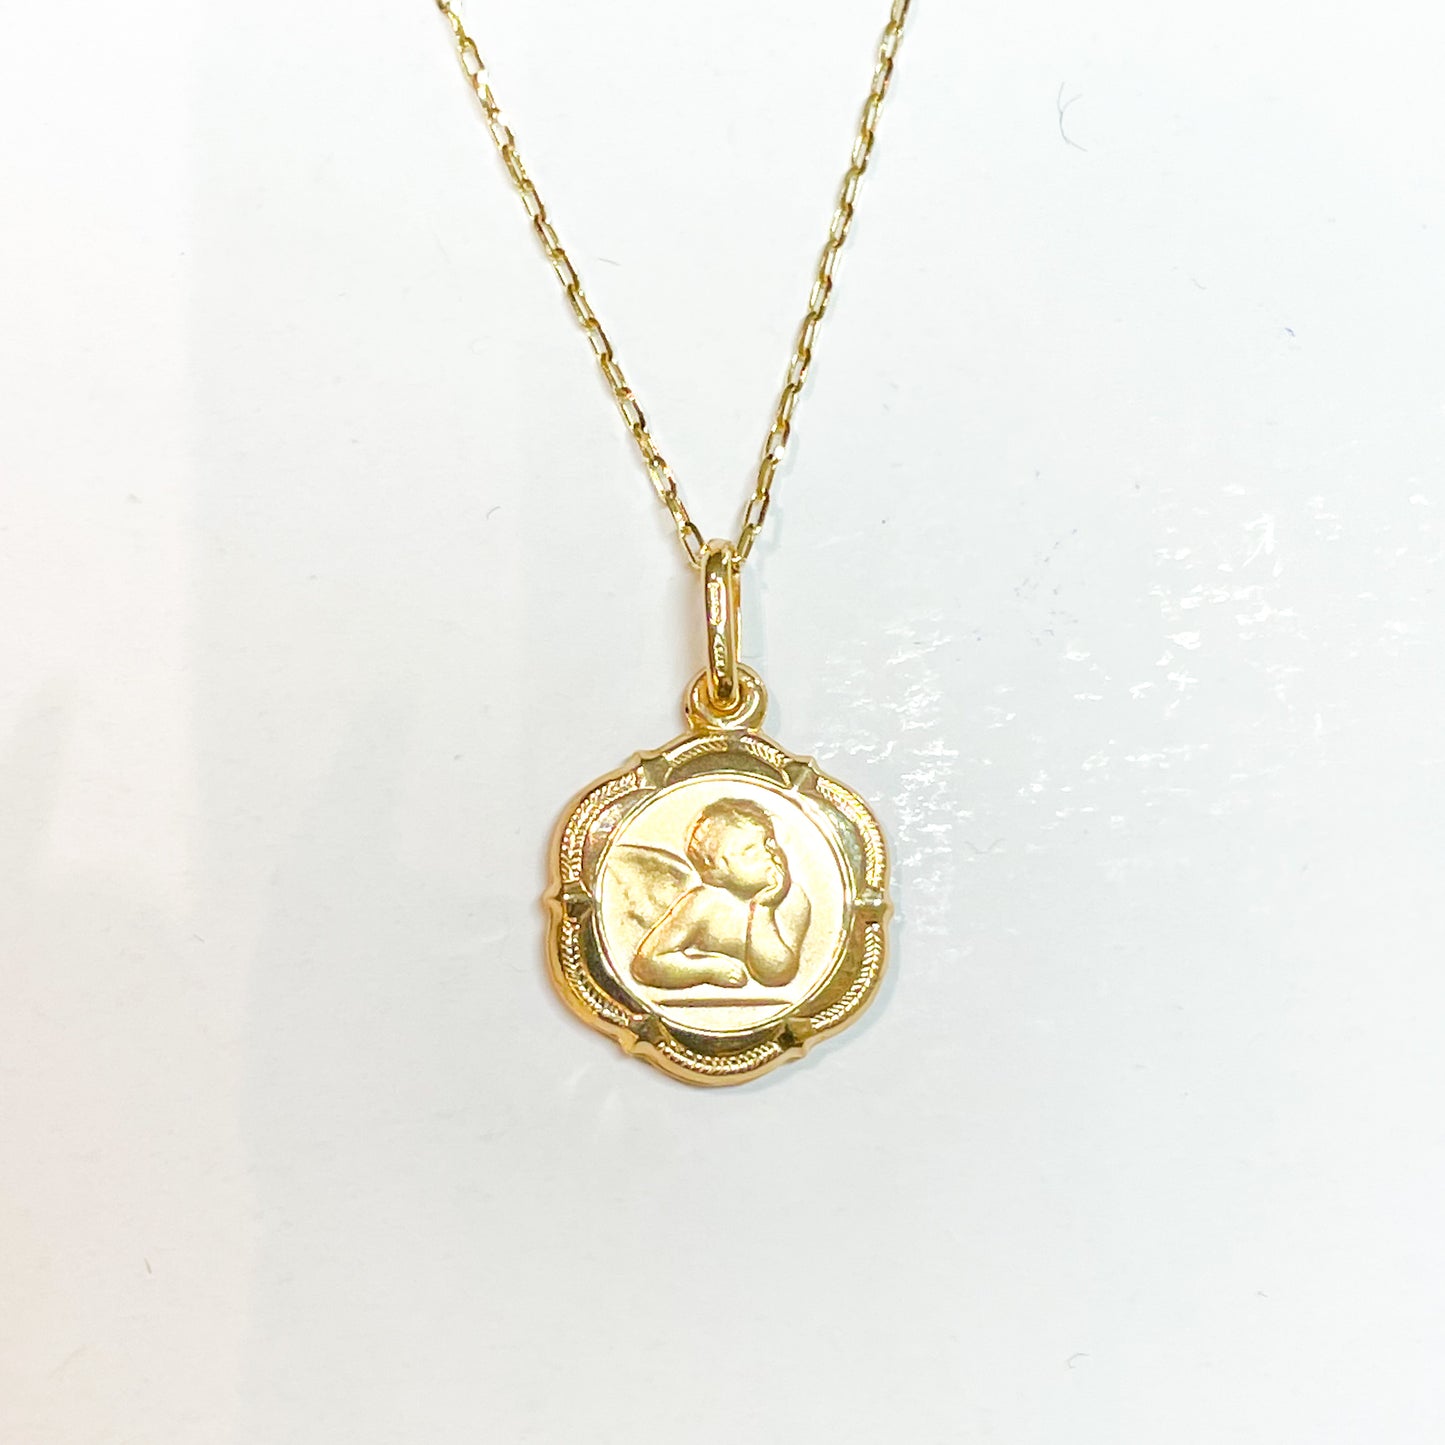 9ct Gold Guardian Angel Necklace - John Ross Jewellers